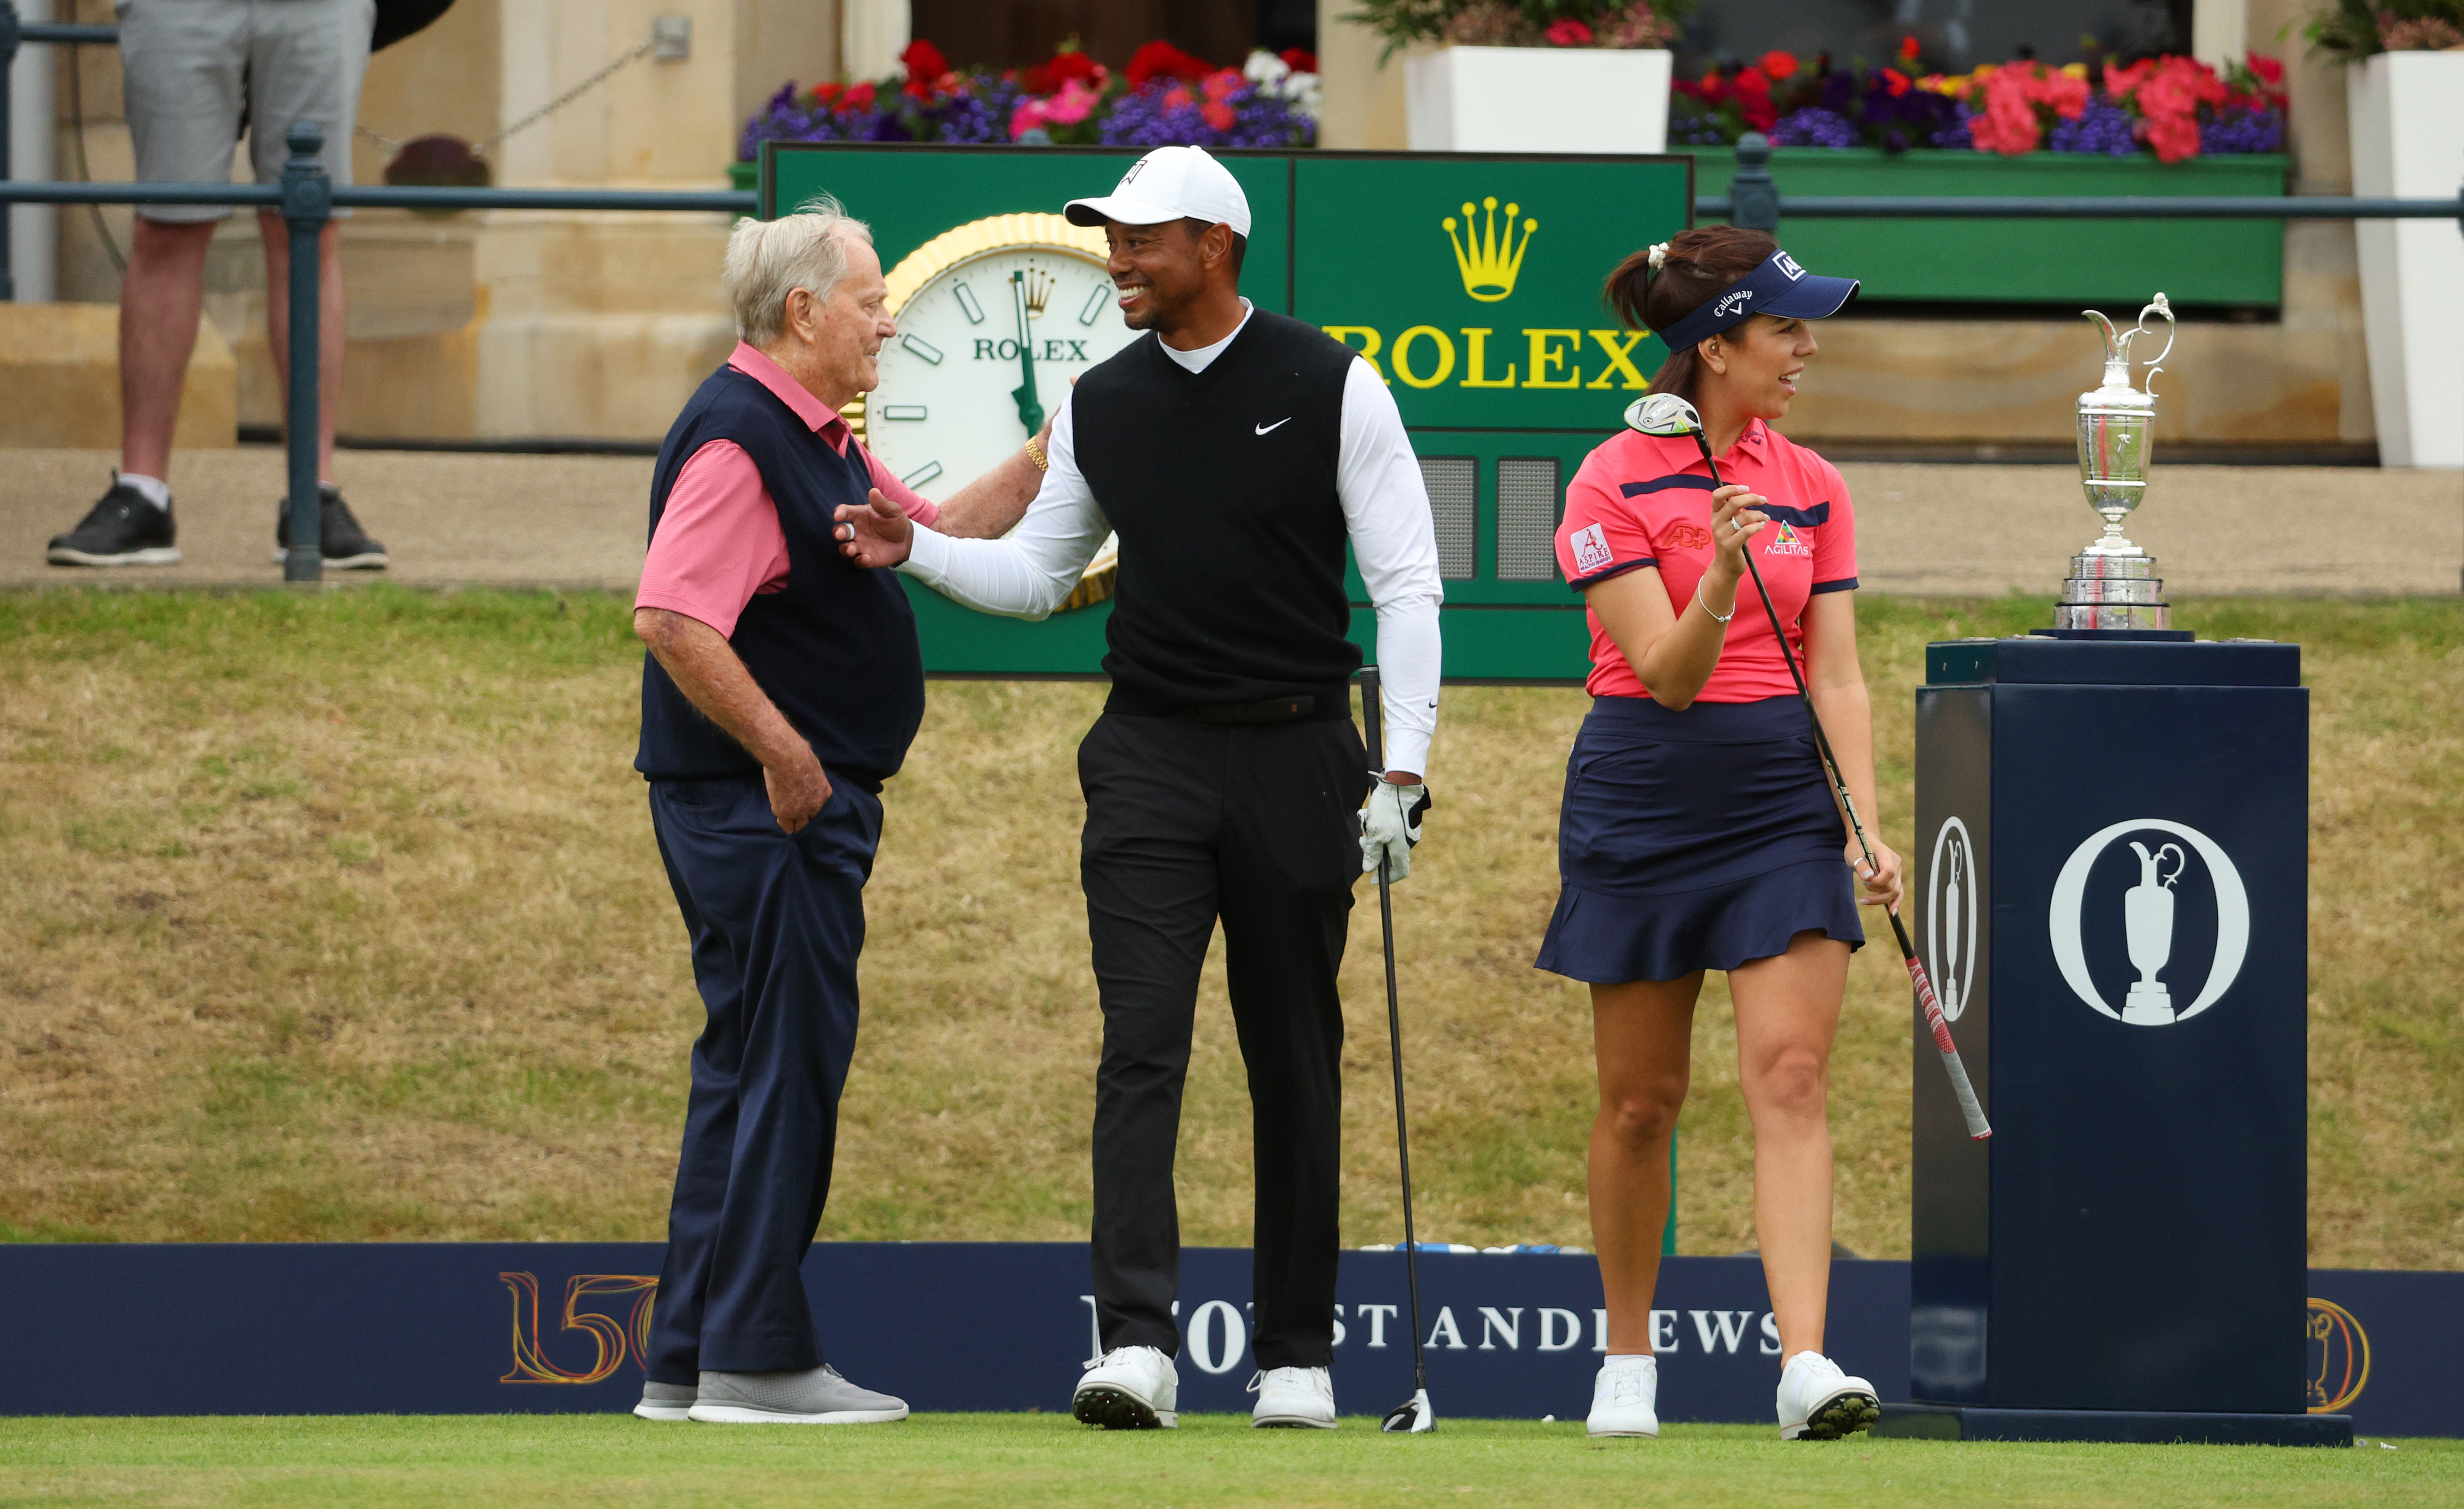 Tiger Woods and Jack Nicklaus on the 1st during the Celebration of Champions Challenge during a practice round prior to The 150th Open at St Andrews Old Course.